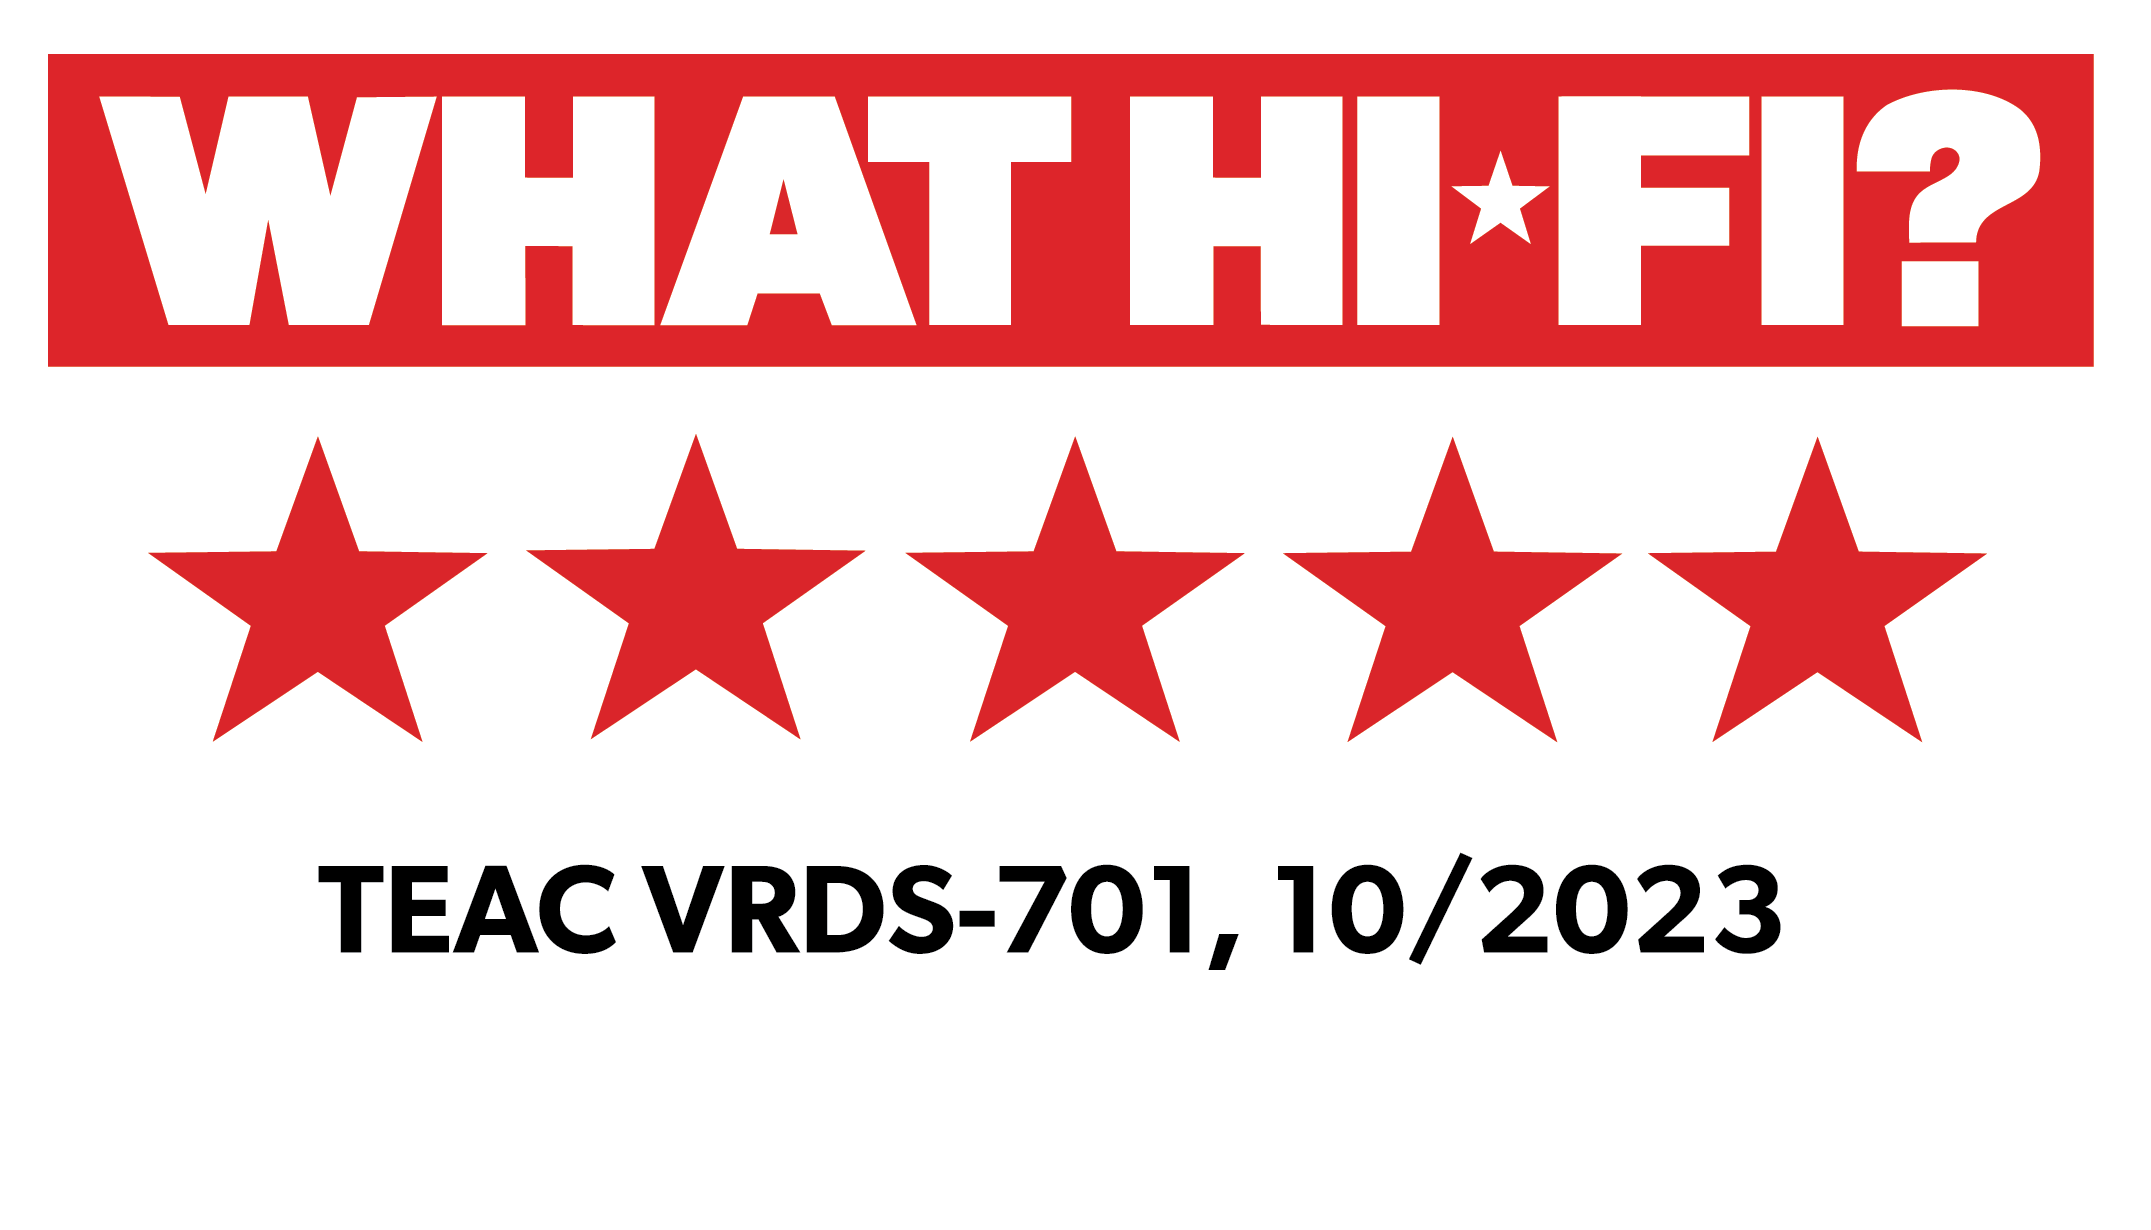 TEAC VRDS-701 5 star review by WhatHiFi?